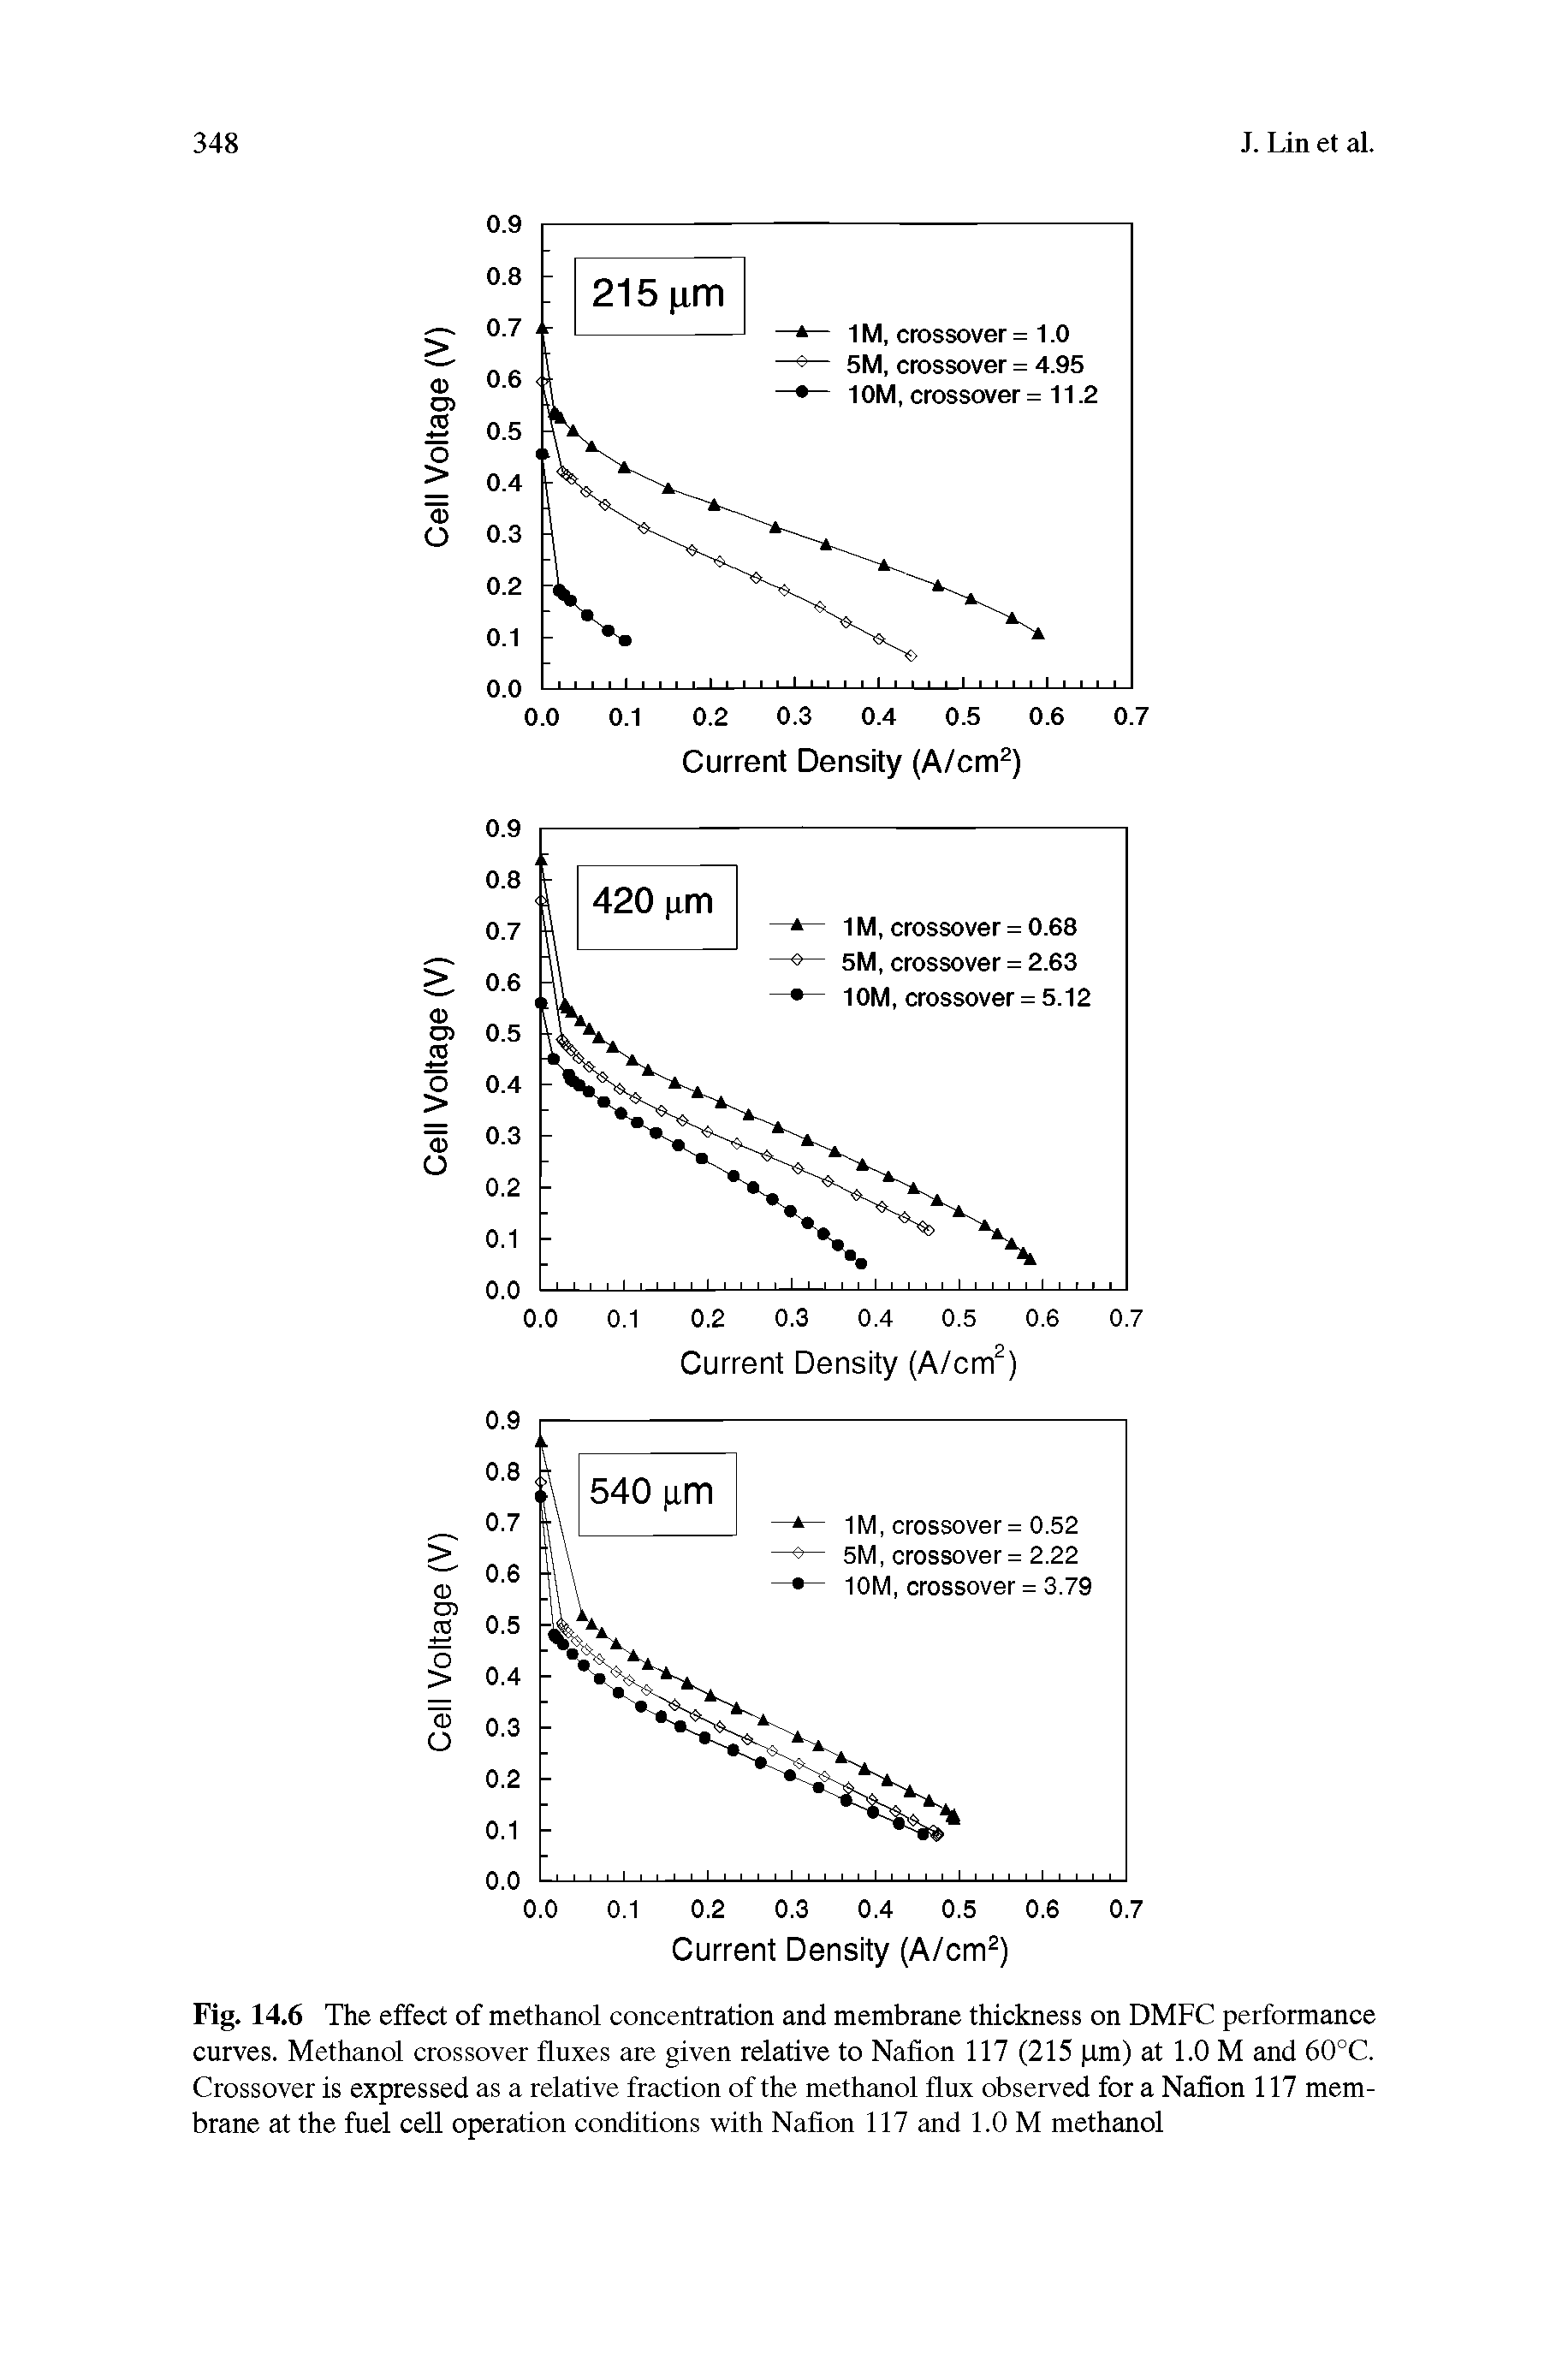 Fig. 14.6 The effect of methanol concentration and membrane thickness on DMFC performance curves. Methanol crossover fluxes are given relative to Nafion 117 (215 um) at 1.0 M and 60°C. Crossover is expressed as a relative fraction of the methanol flux observed for a Nafion 117 membrane at the fuel cell operation conditions with Nafion 117 and 1.0 M methanol...